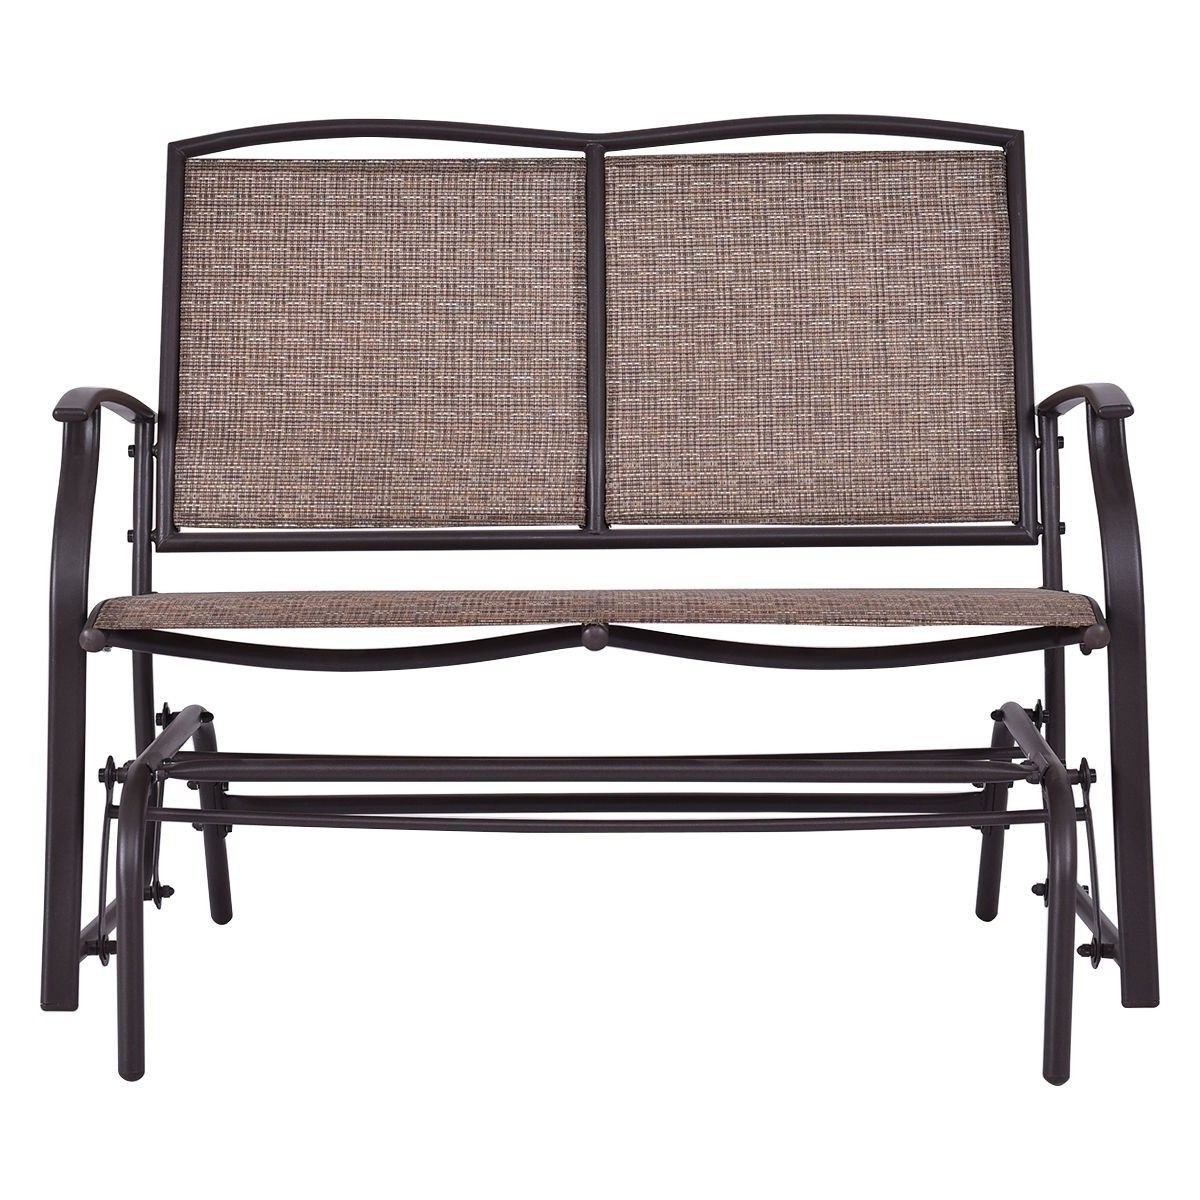 Amazon : Ak Energy 2 Person Outdoor Patio Swing Glider Intended For Best And Newest 2 Person Loveseat Chair Patio Porch Swings With Rocker (View 29 of 30)